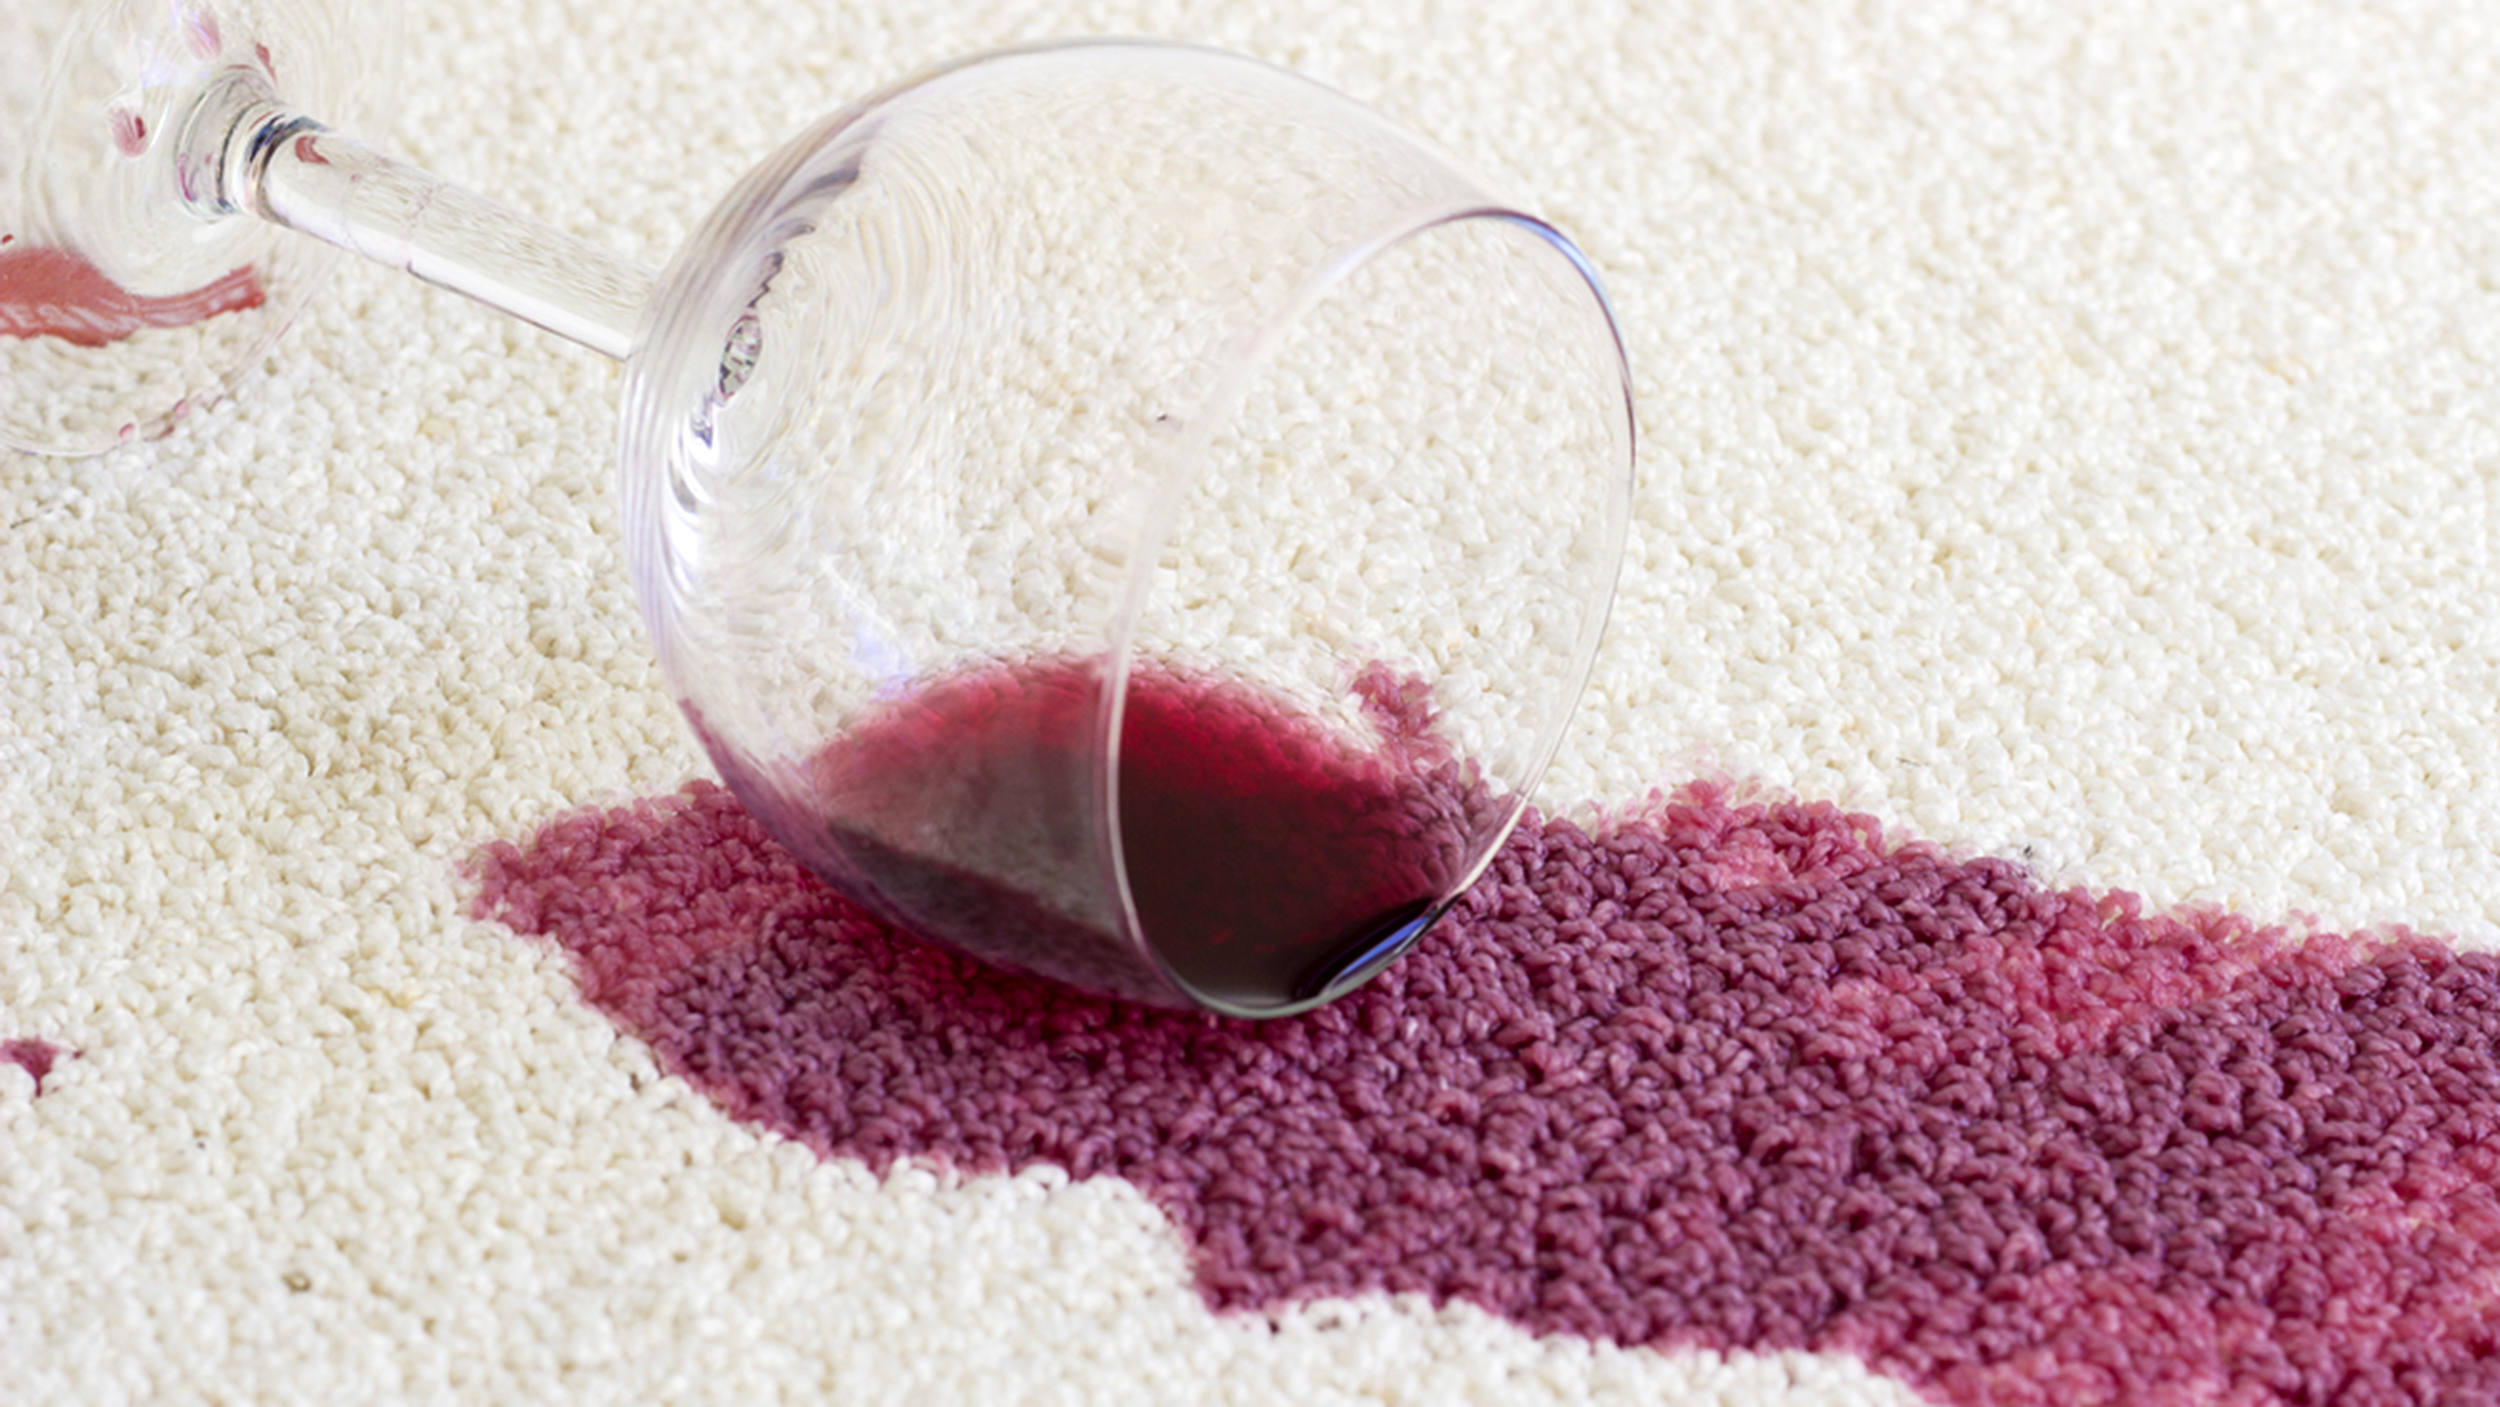 Spilled red wine photo